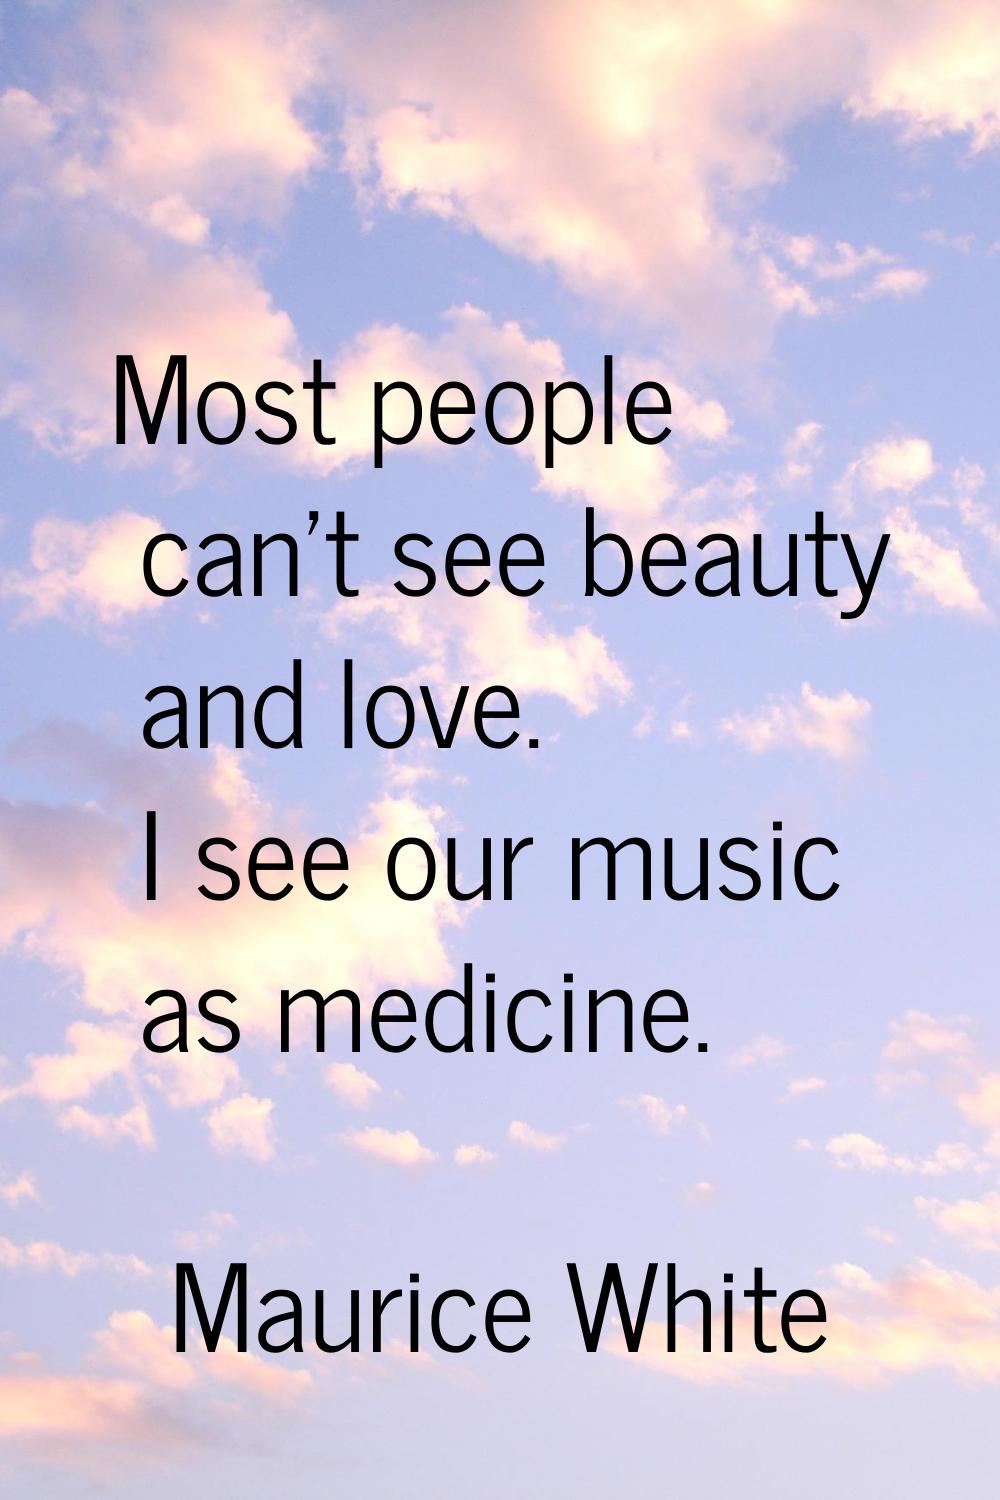 Most people can't see beauty and love. I see our music as medicine.